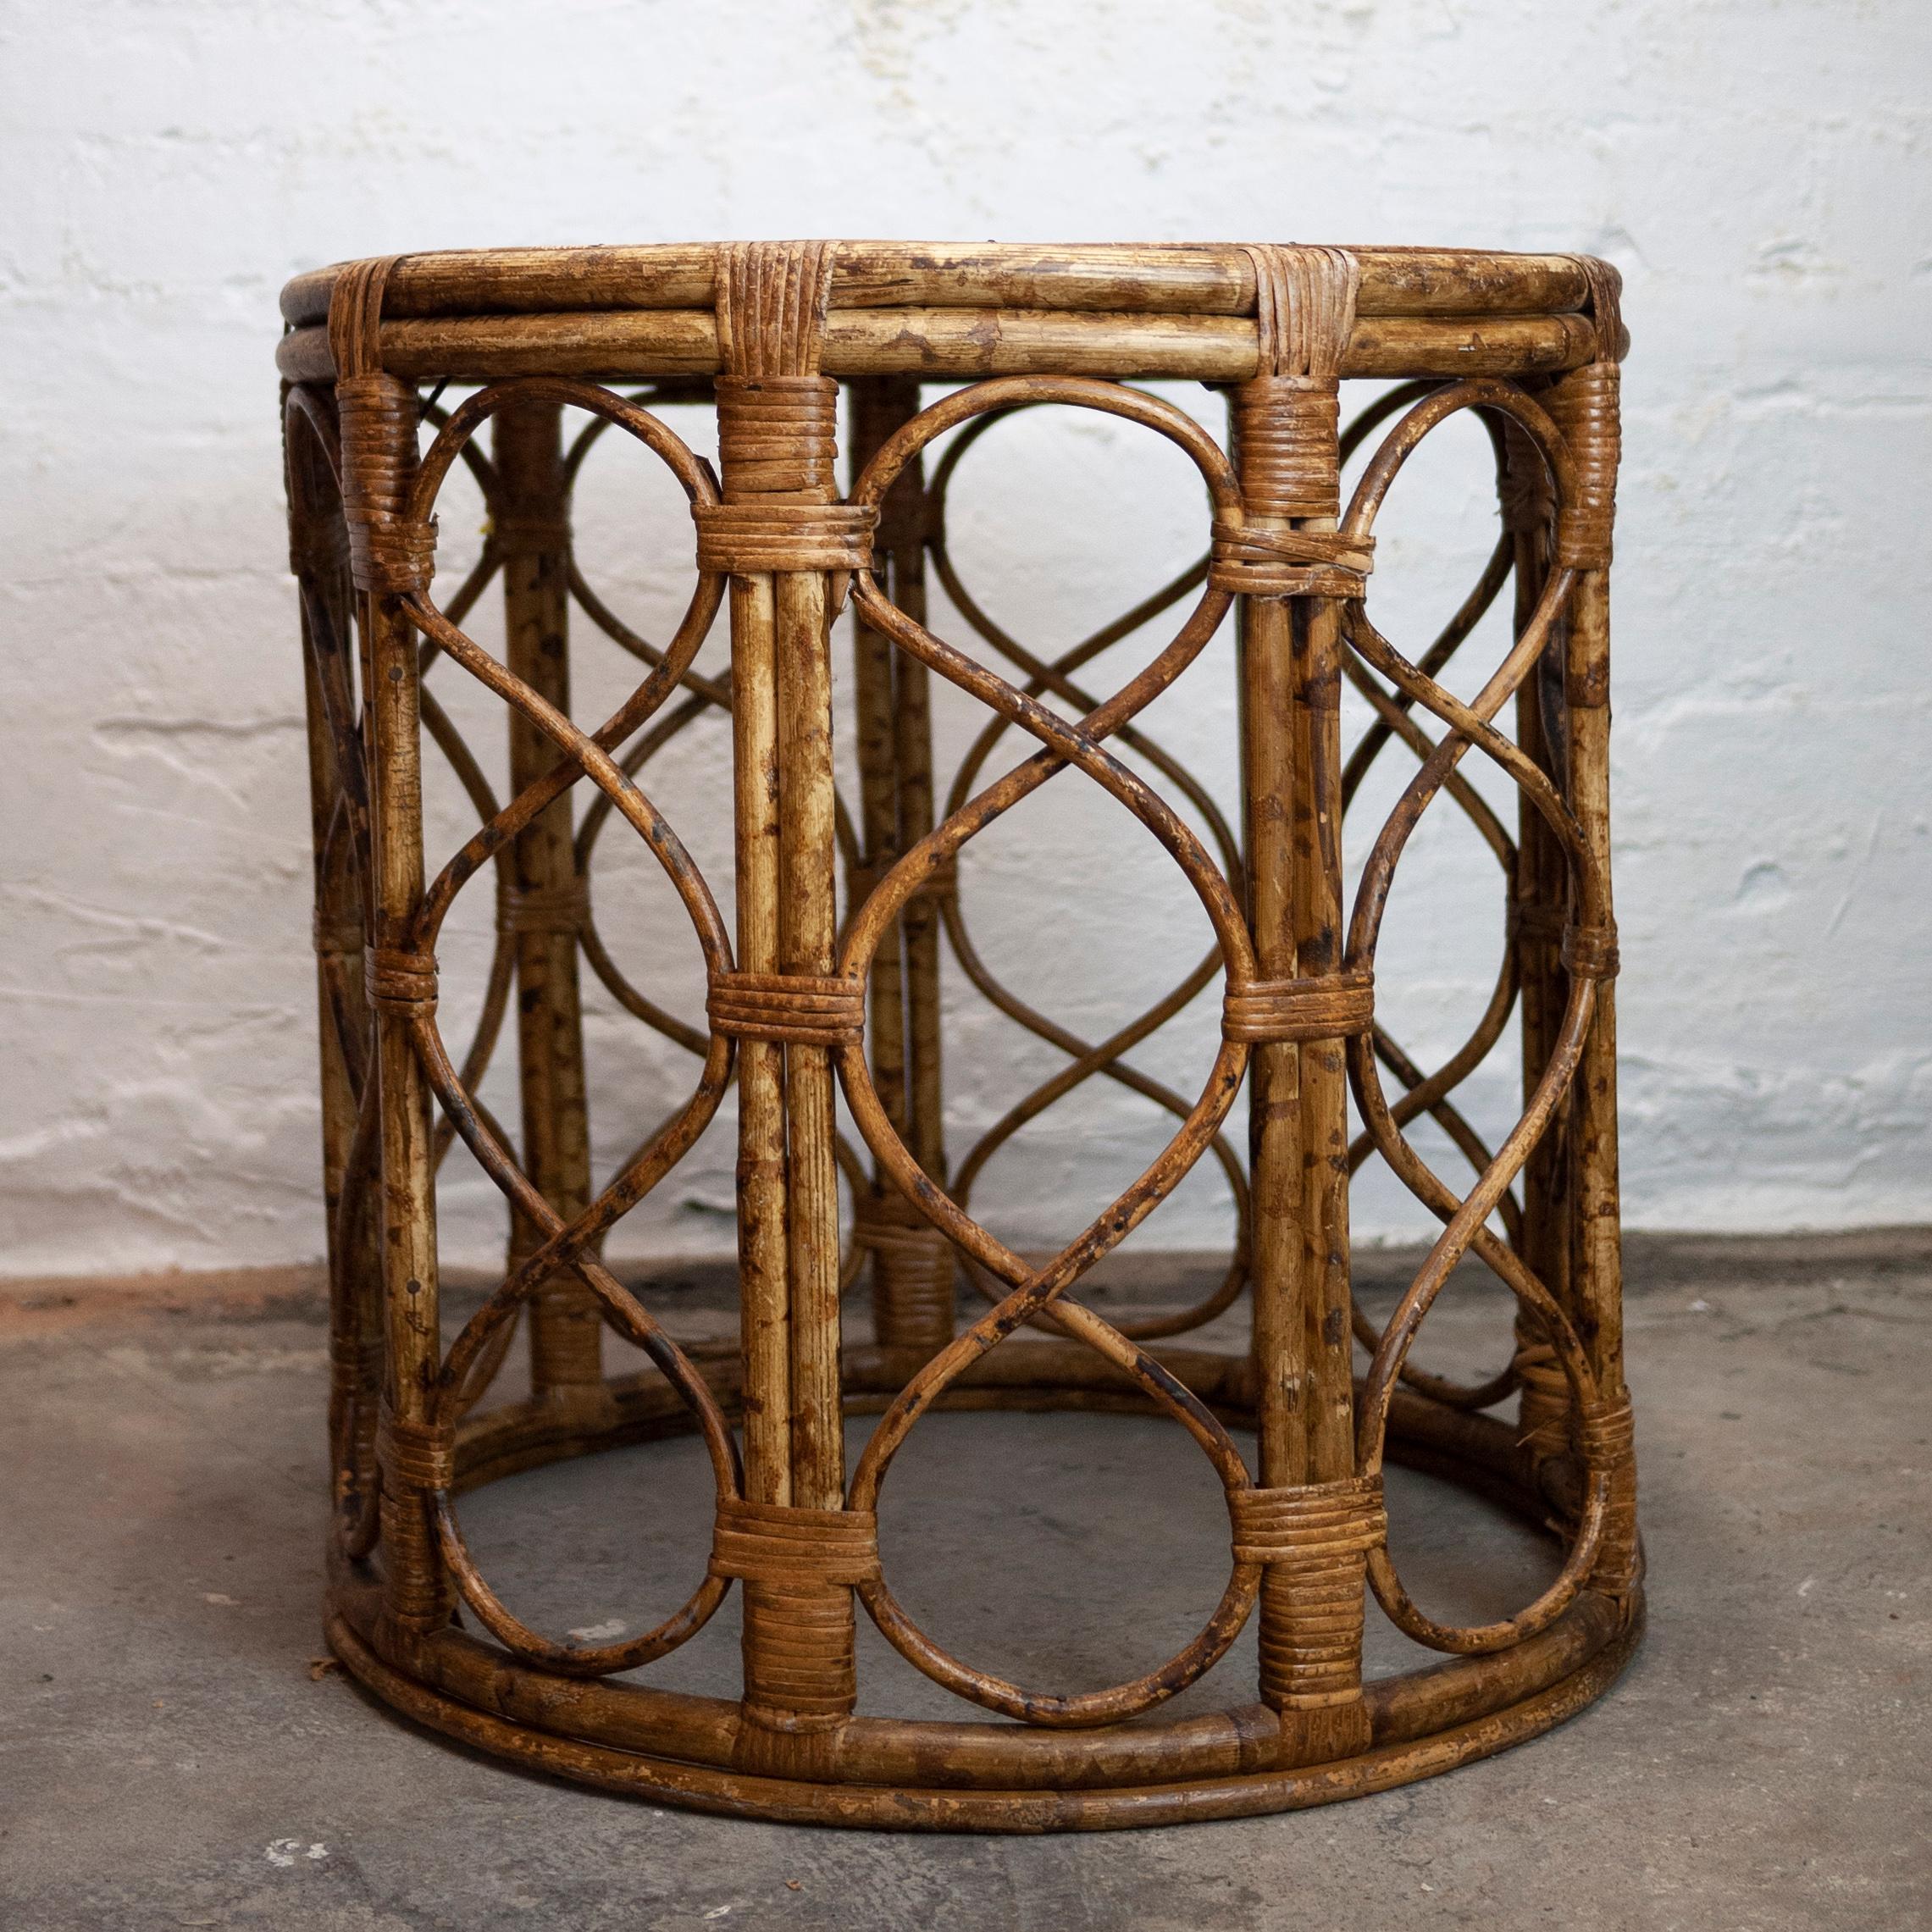 A woven bamboo and cane side table from the 1960s.

Manufacturer - Unknown

Design Period - 1960 to 1969

Style - Vintage, Mid-Century

Detailed Condition - Good with minimal defects.

Restoration and Damage Details - Light wear consistent